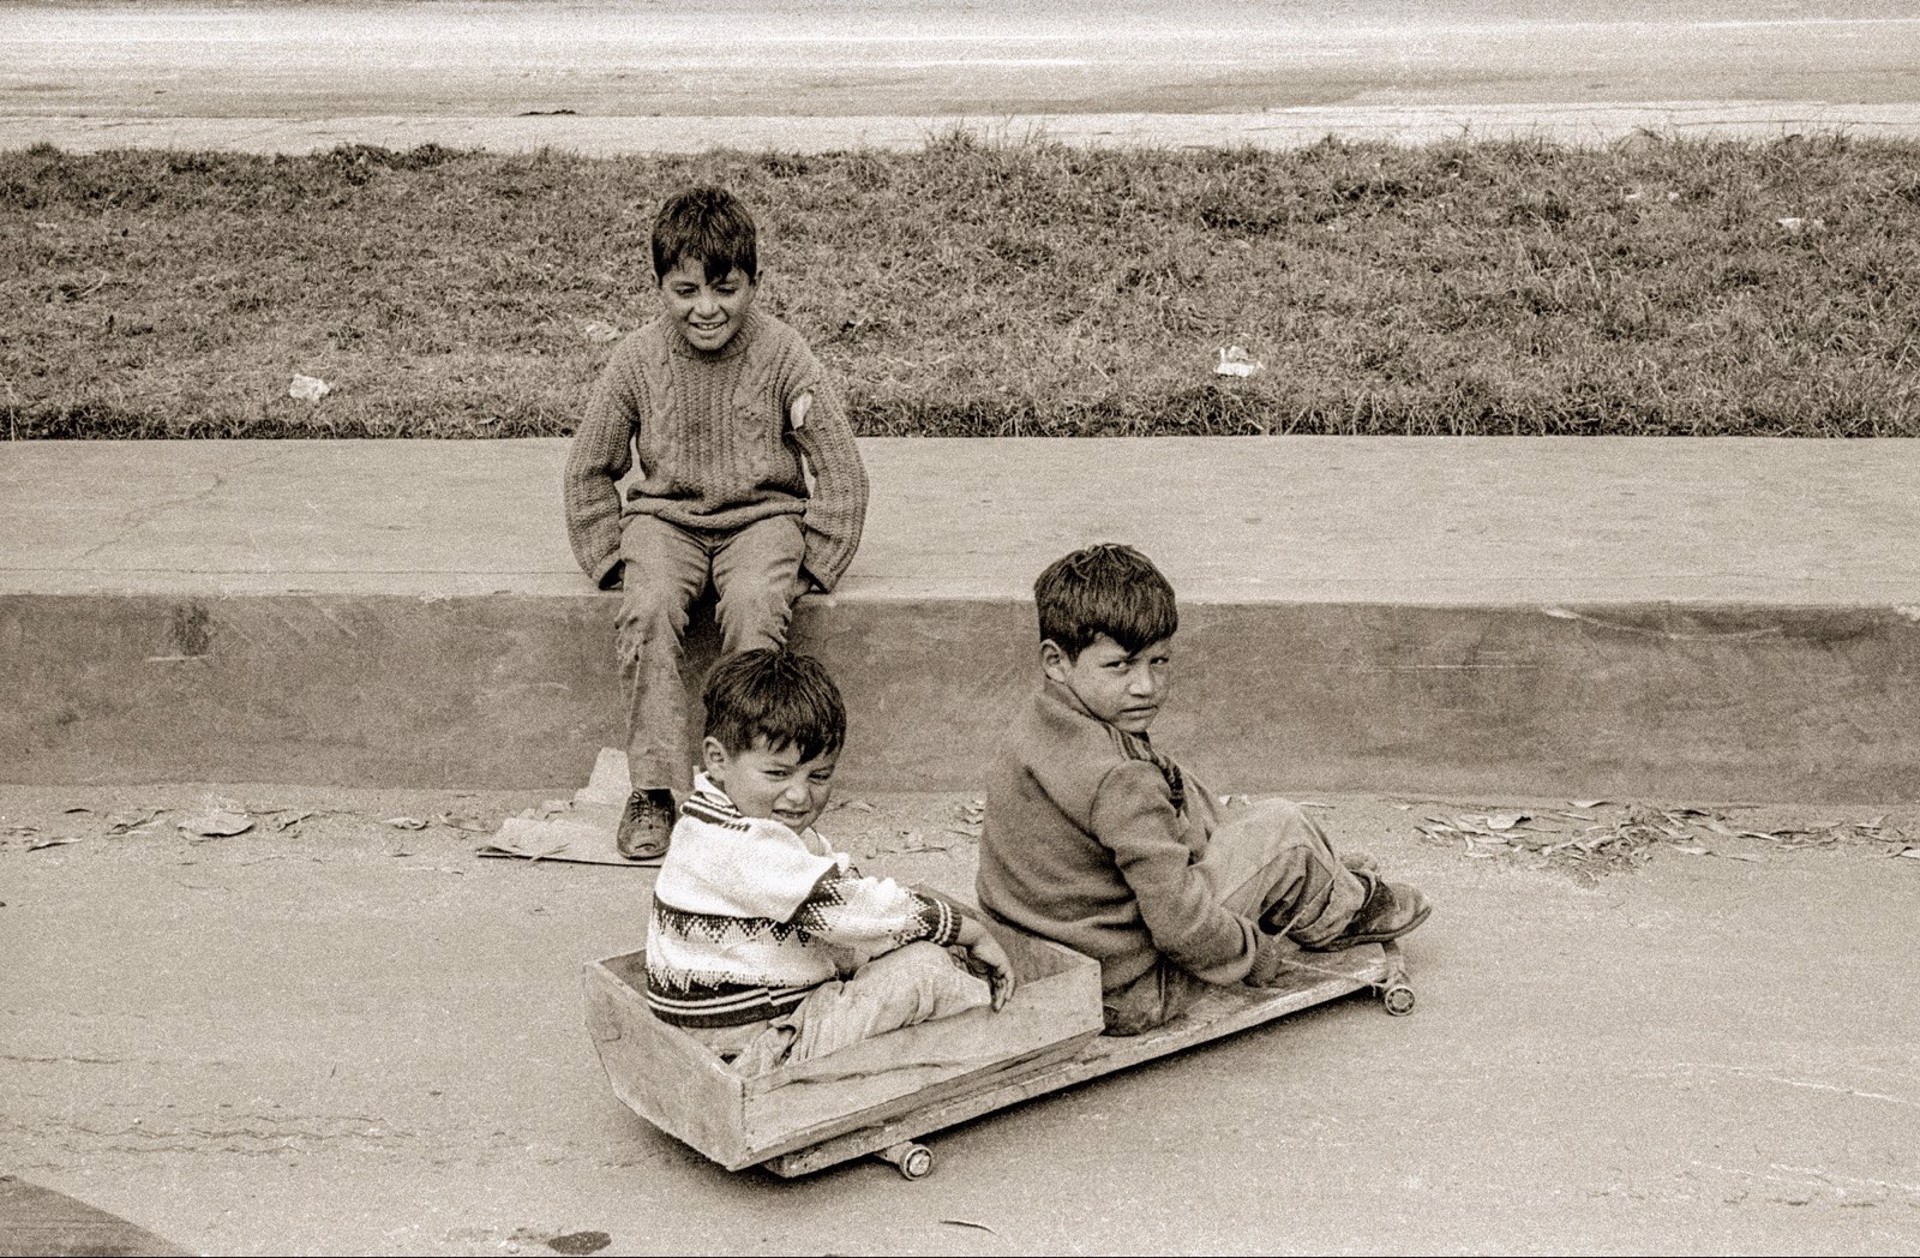 Kids with Improvised Go Cart, Unframed (041) by Jack Dempsey